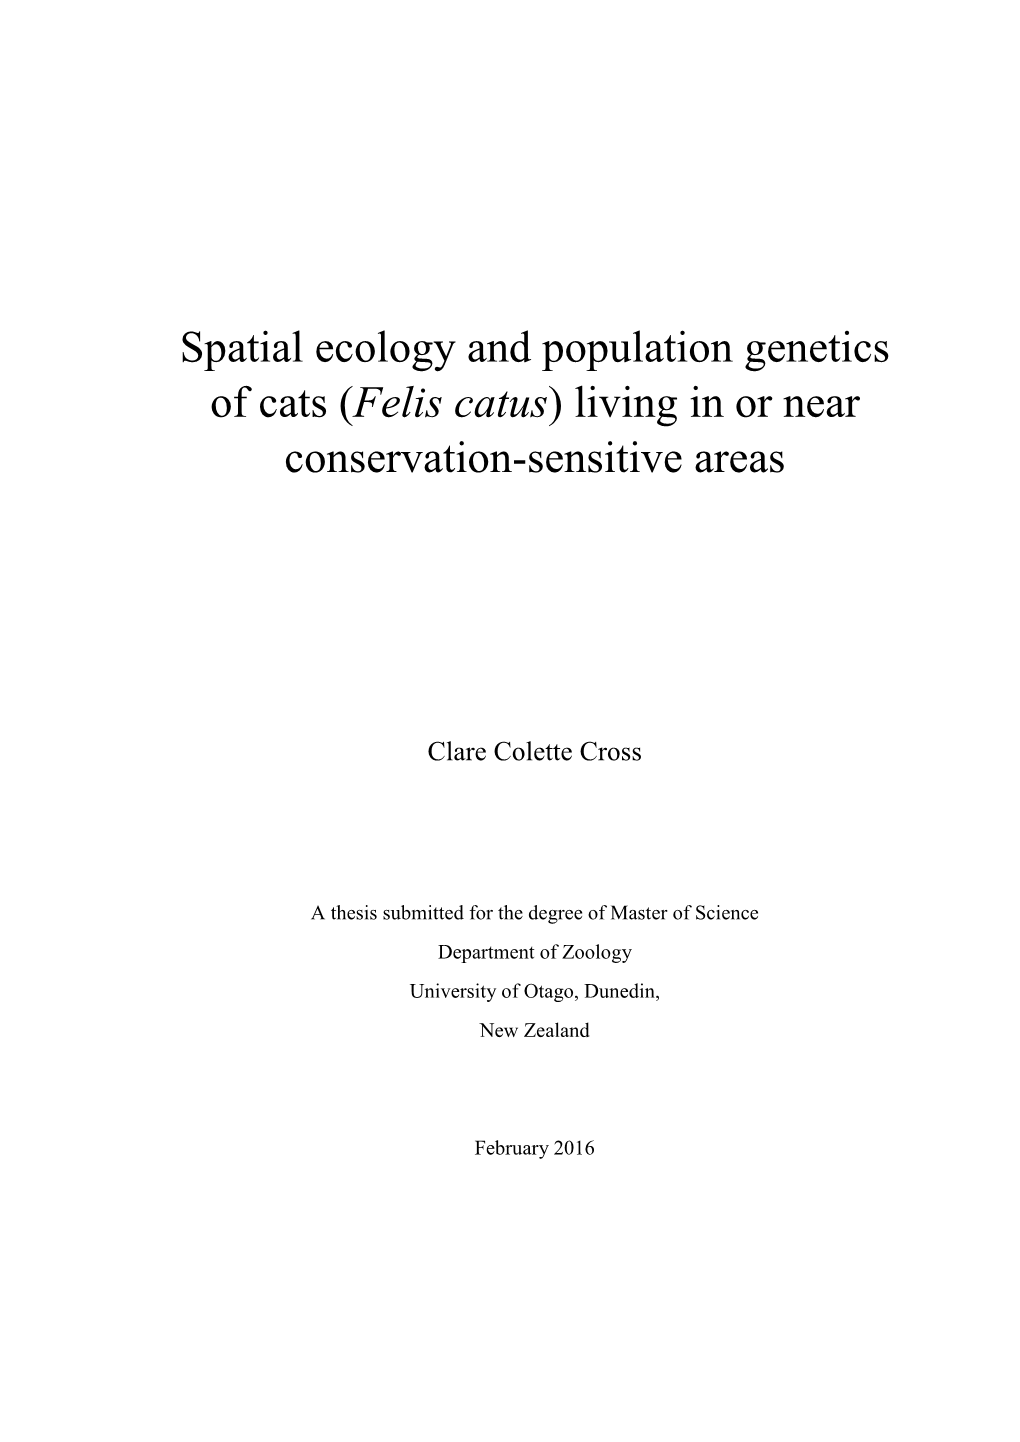 Spatial Ecology and Population Genetics of Cats (Felis Catus) Living in Or Near Conservation-Sensitive Areas